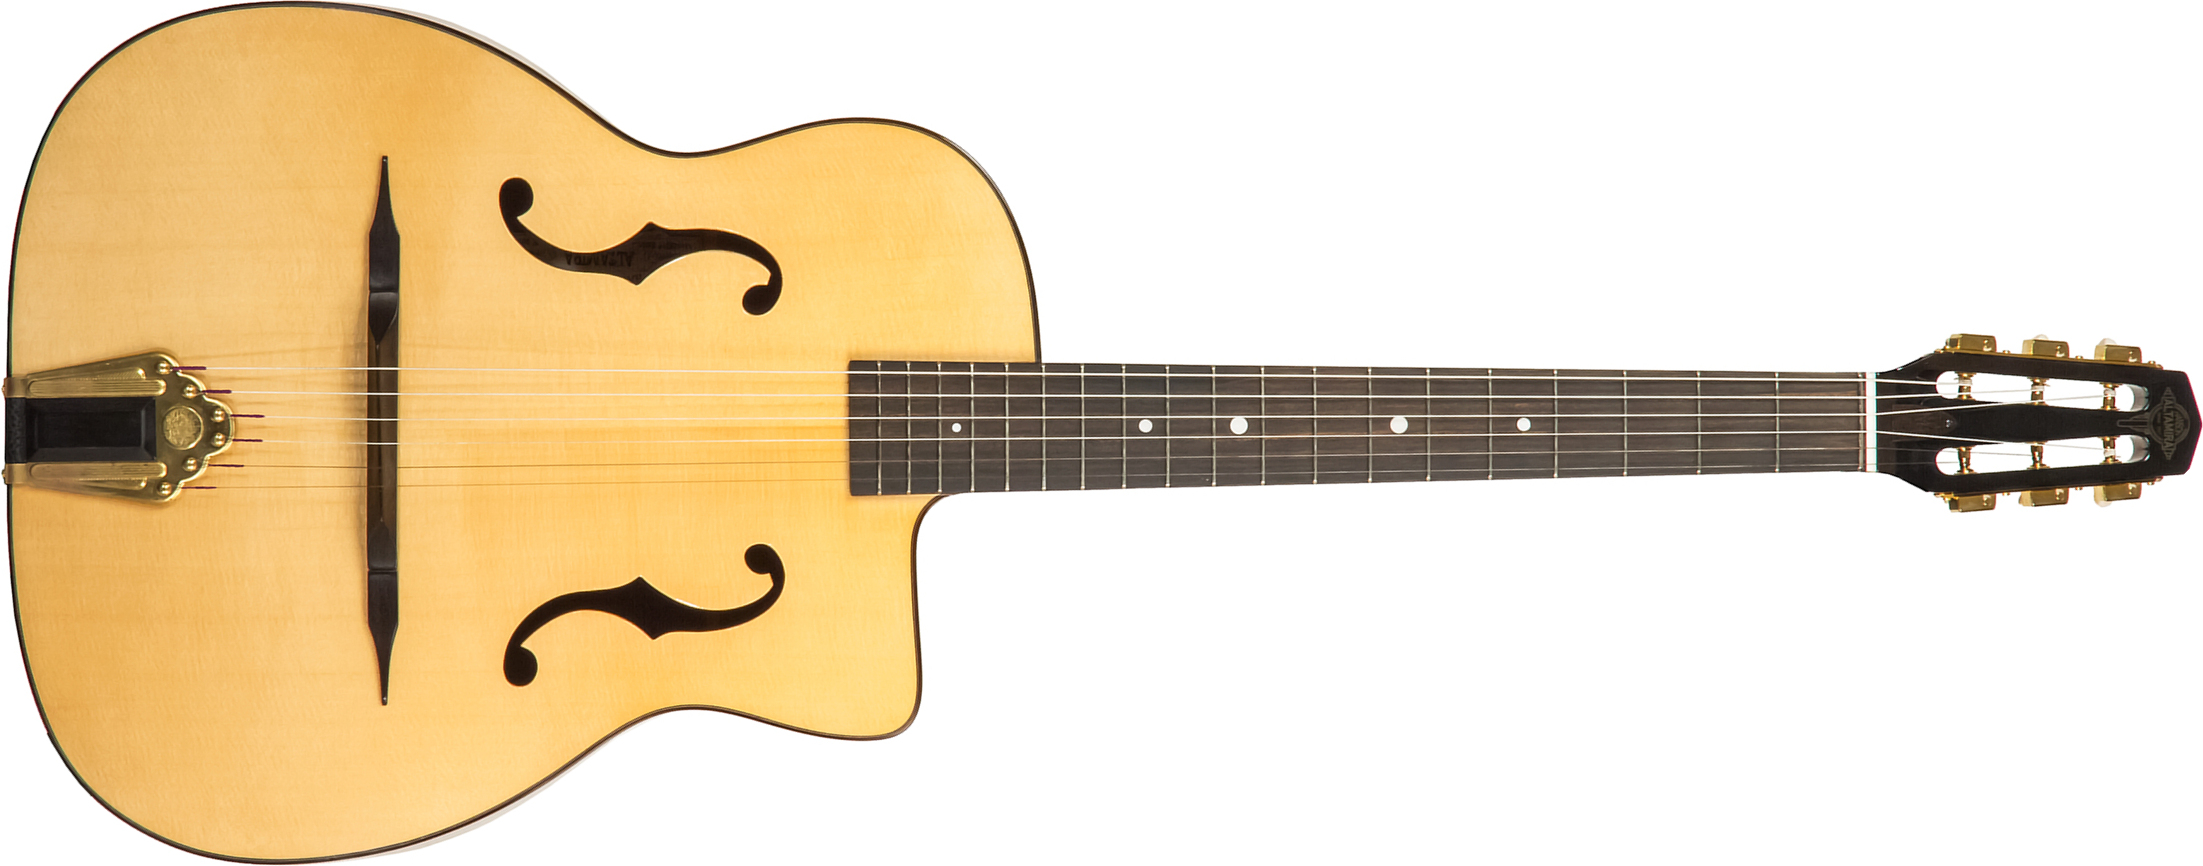 Altamira M01f Gypsy Jazz Cw Epicea Palissandre Eb - Natural Gloss - Gypsy guitar - Main picture